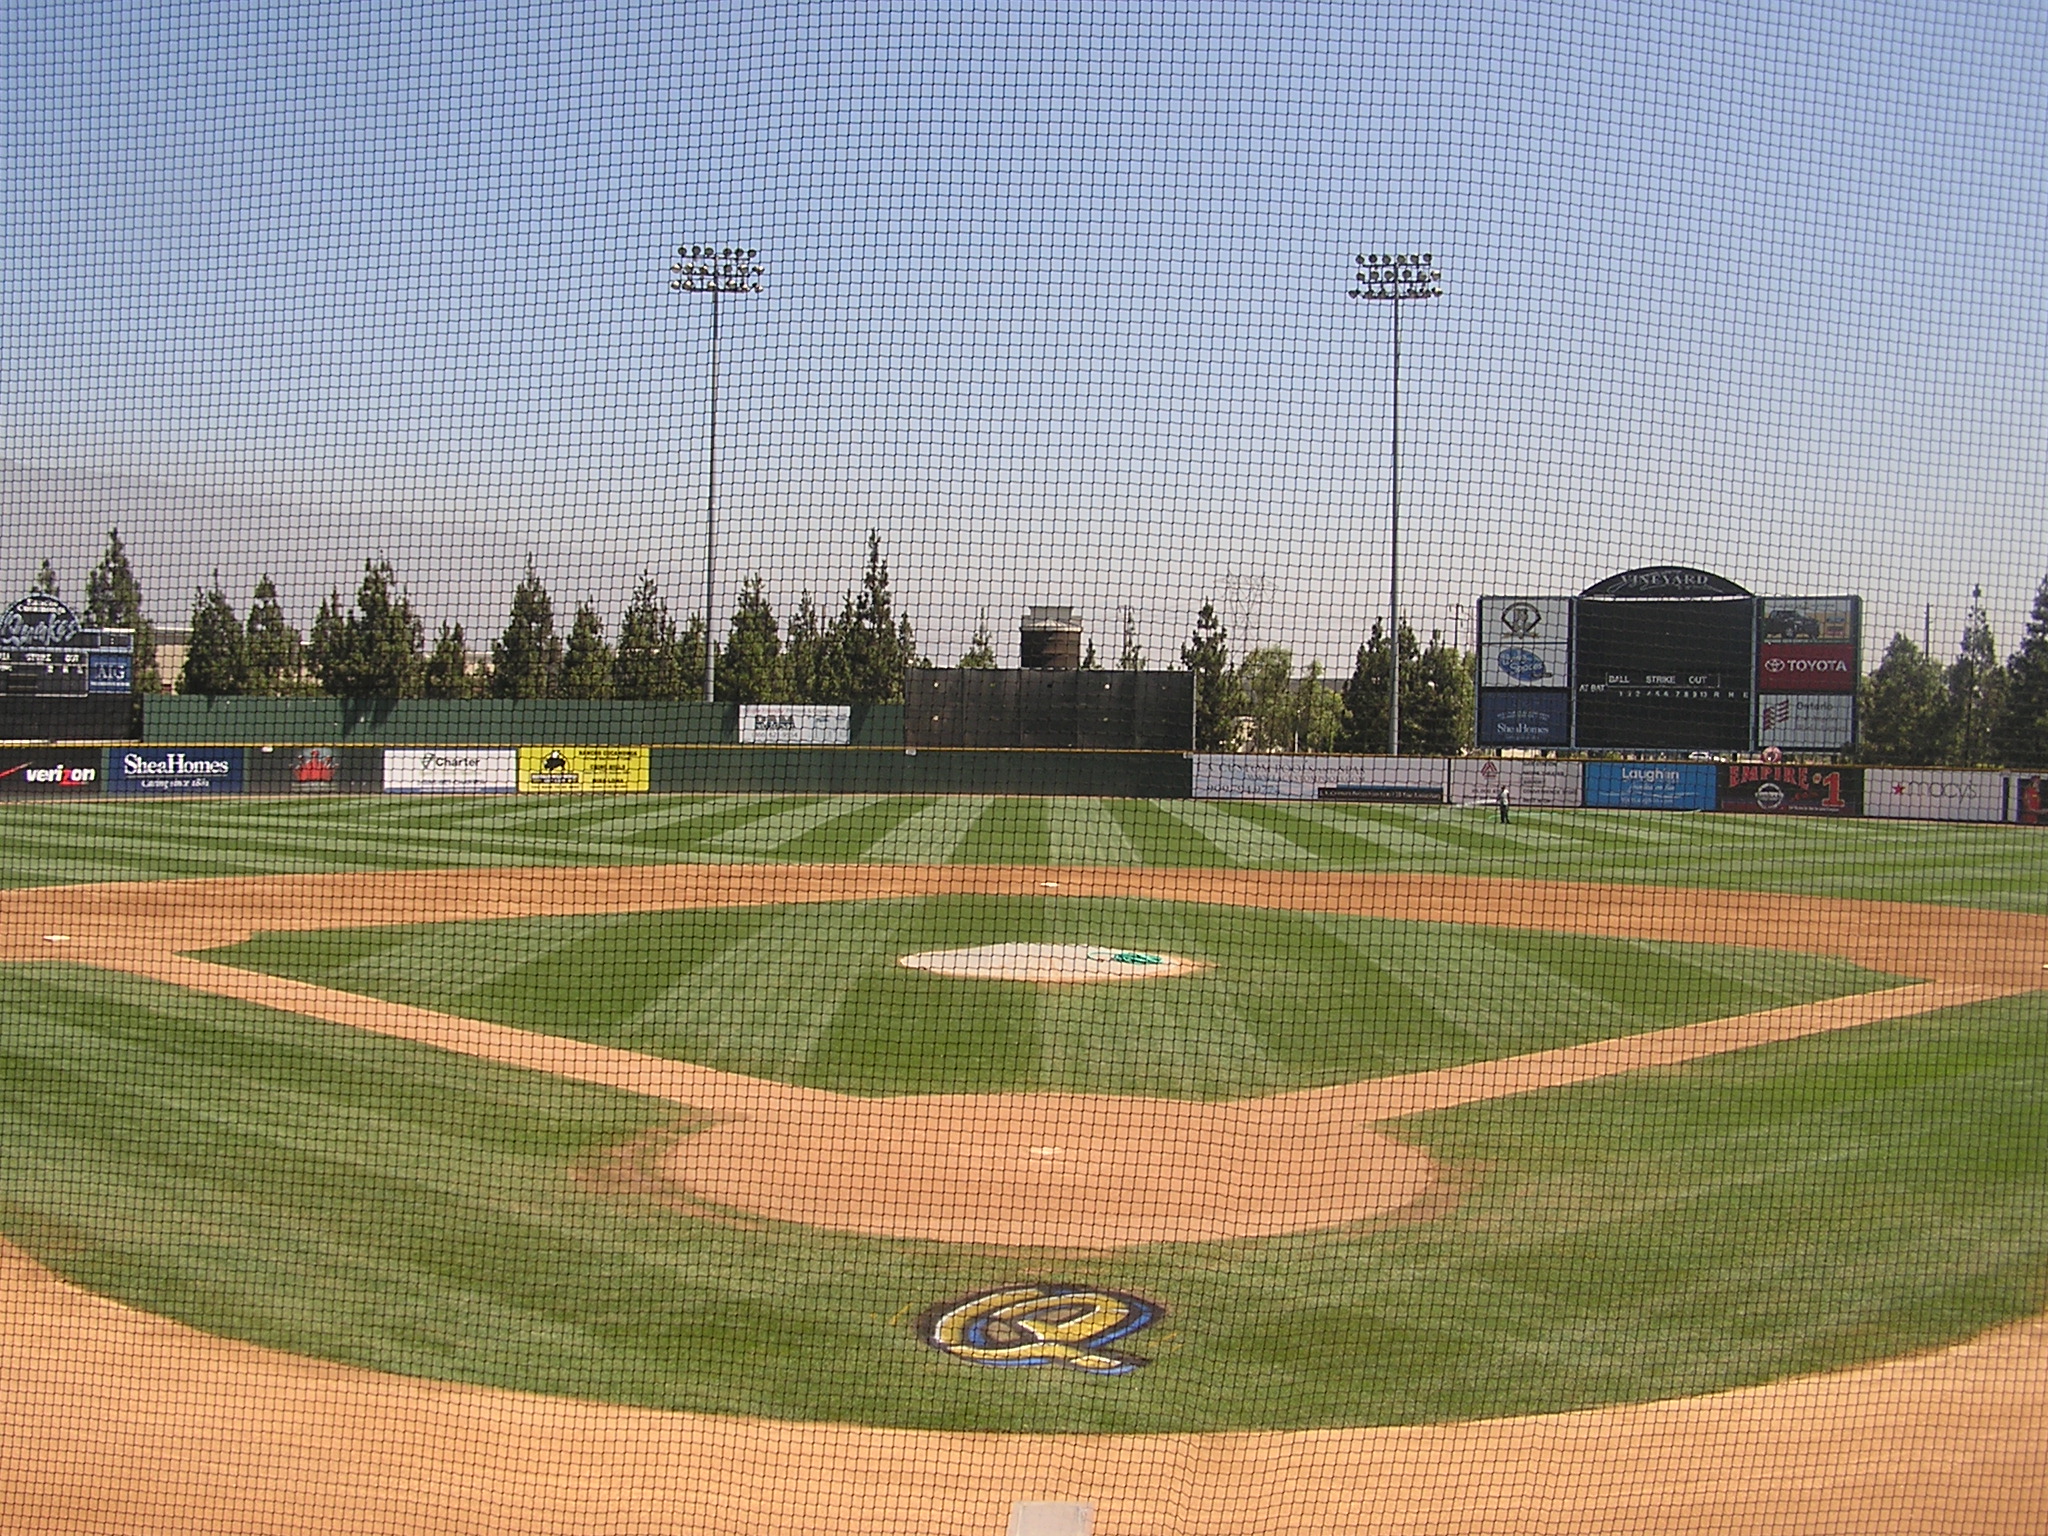 The Field at Rancho Cucamonga - The Epicenter